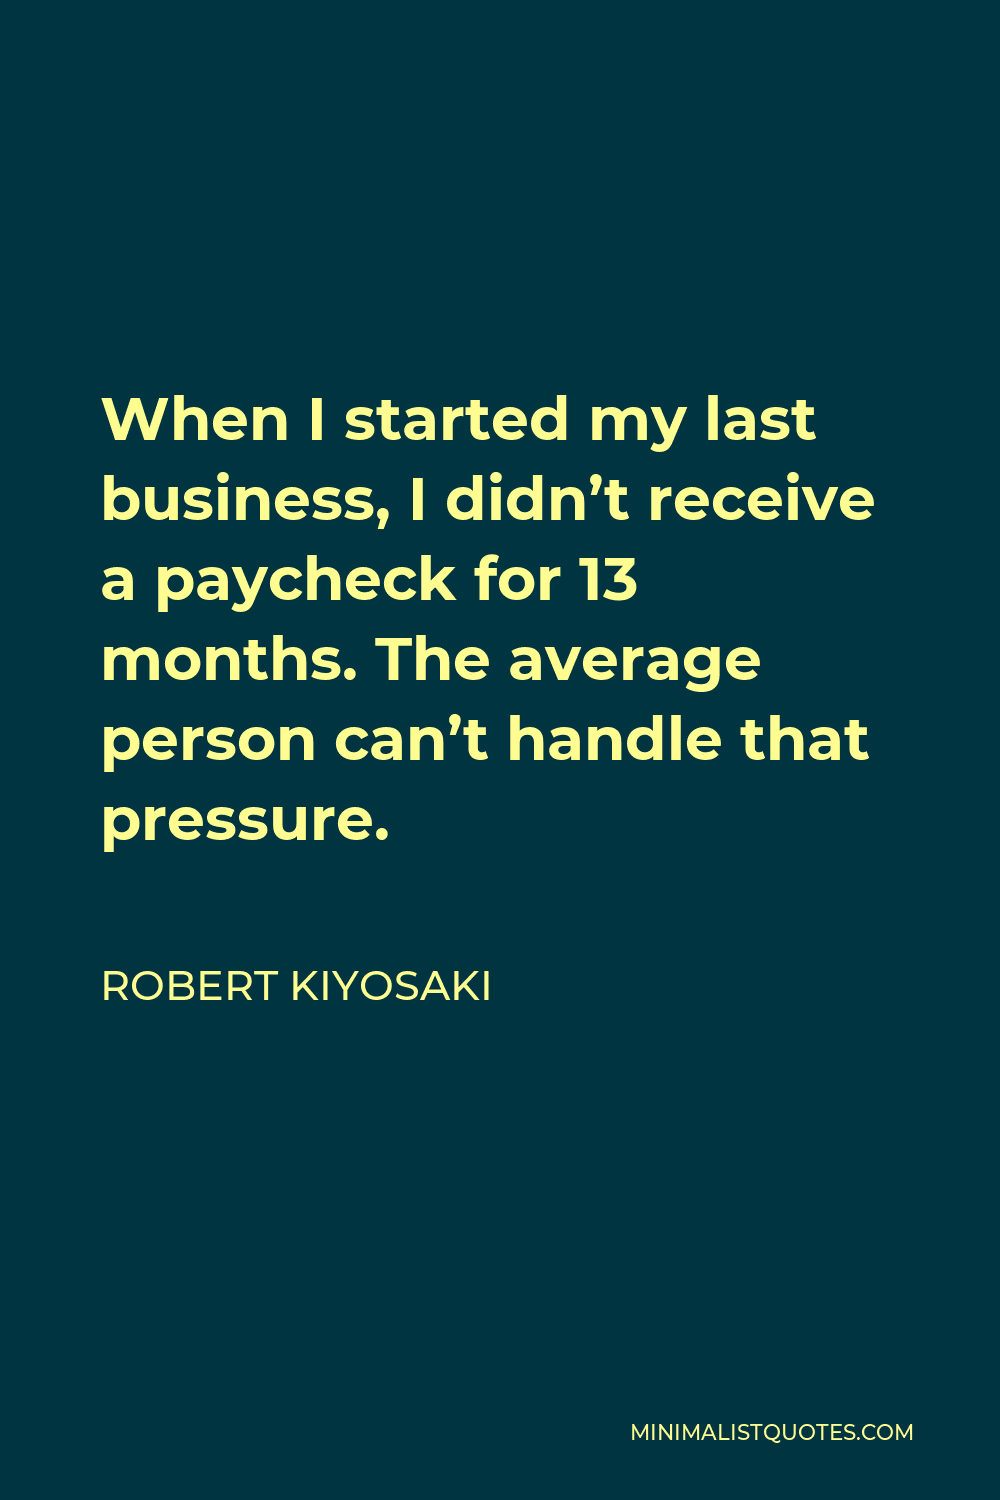 Robert Kiyosaki Quote - When I started my last business, I didn’t receive a paycheck for 13 months. The average person can’t handle that pressure.